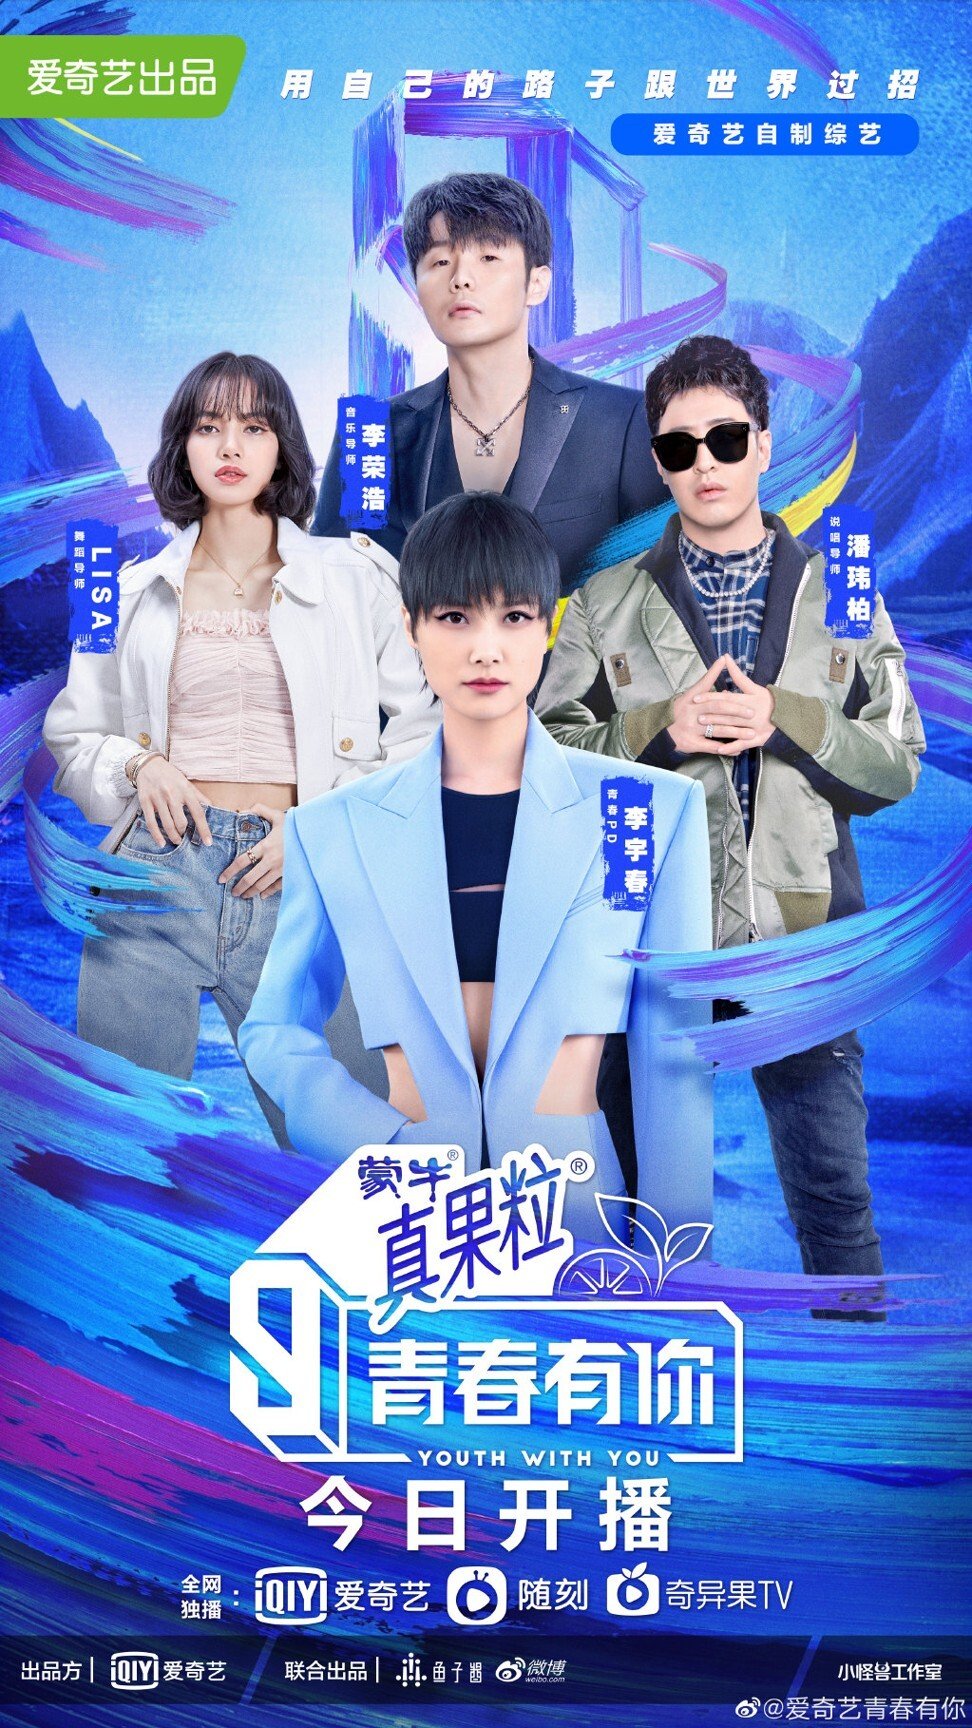 Youth With You is a Chinese boy band talent show. Photo: iQiyi